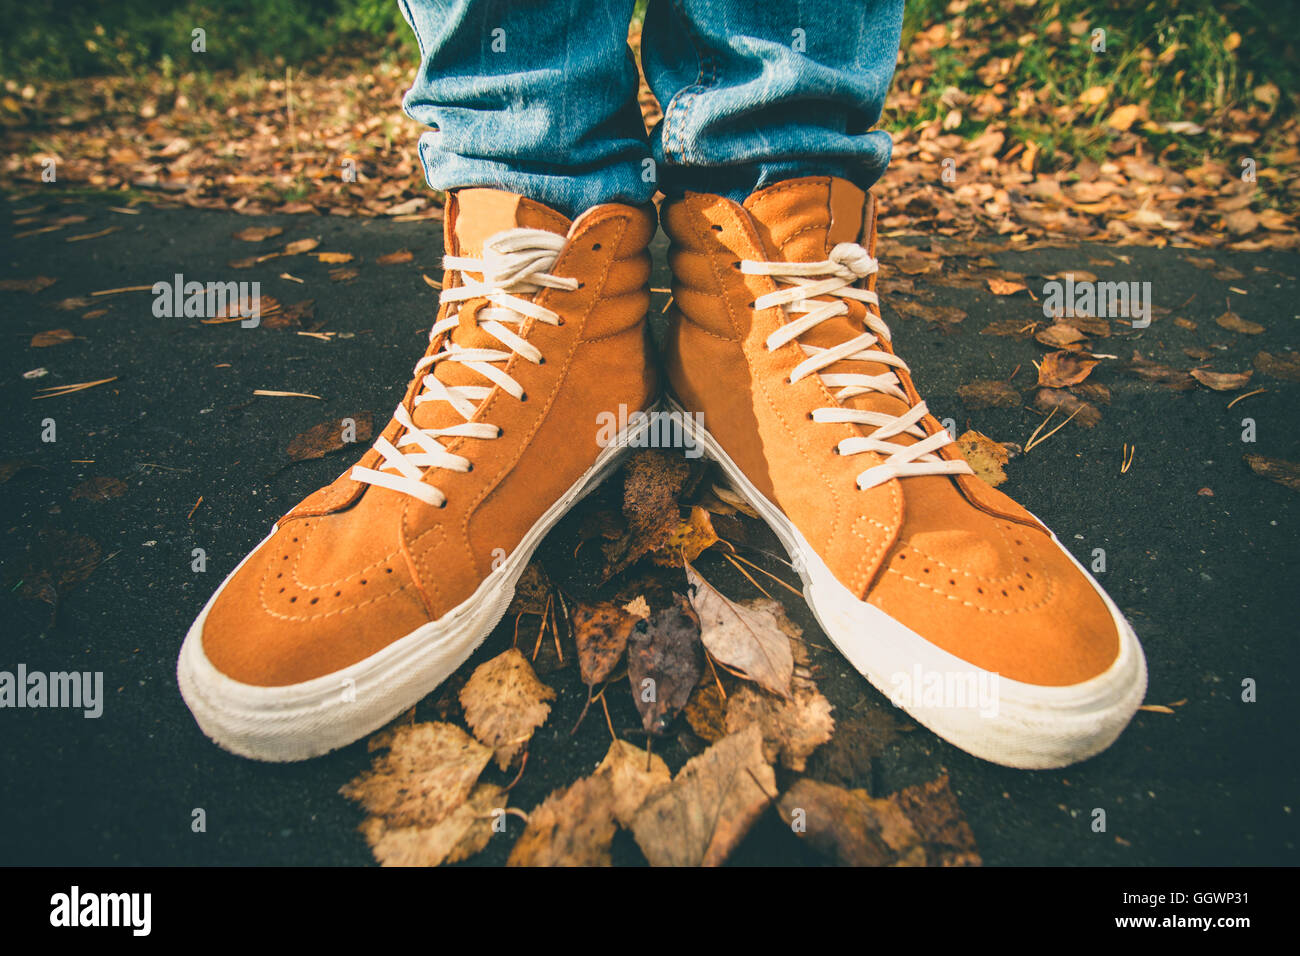 Feet sneakers walking on fall leaves Outdoor with Autumn season nature on background Lifestyle Fashion trendy style Stock Photo